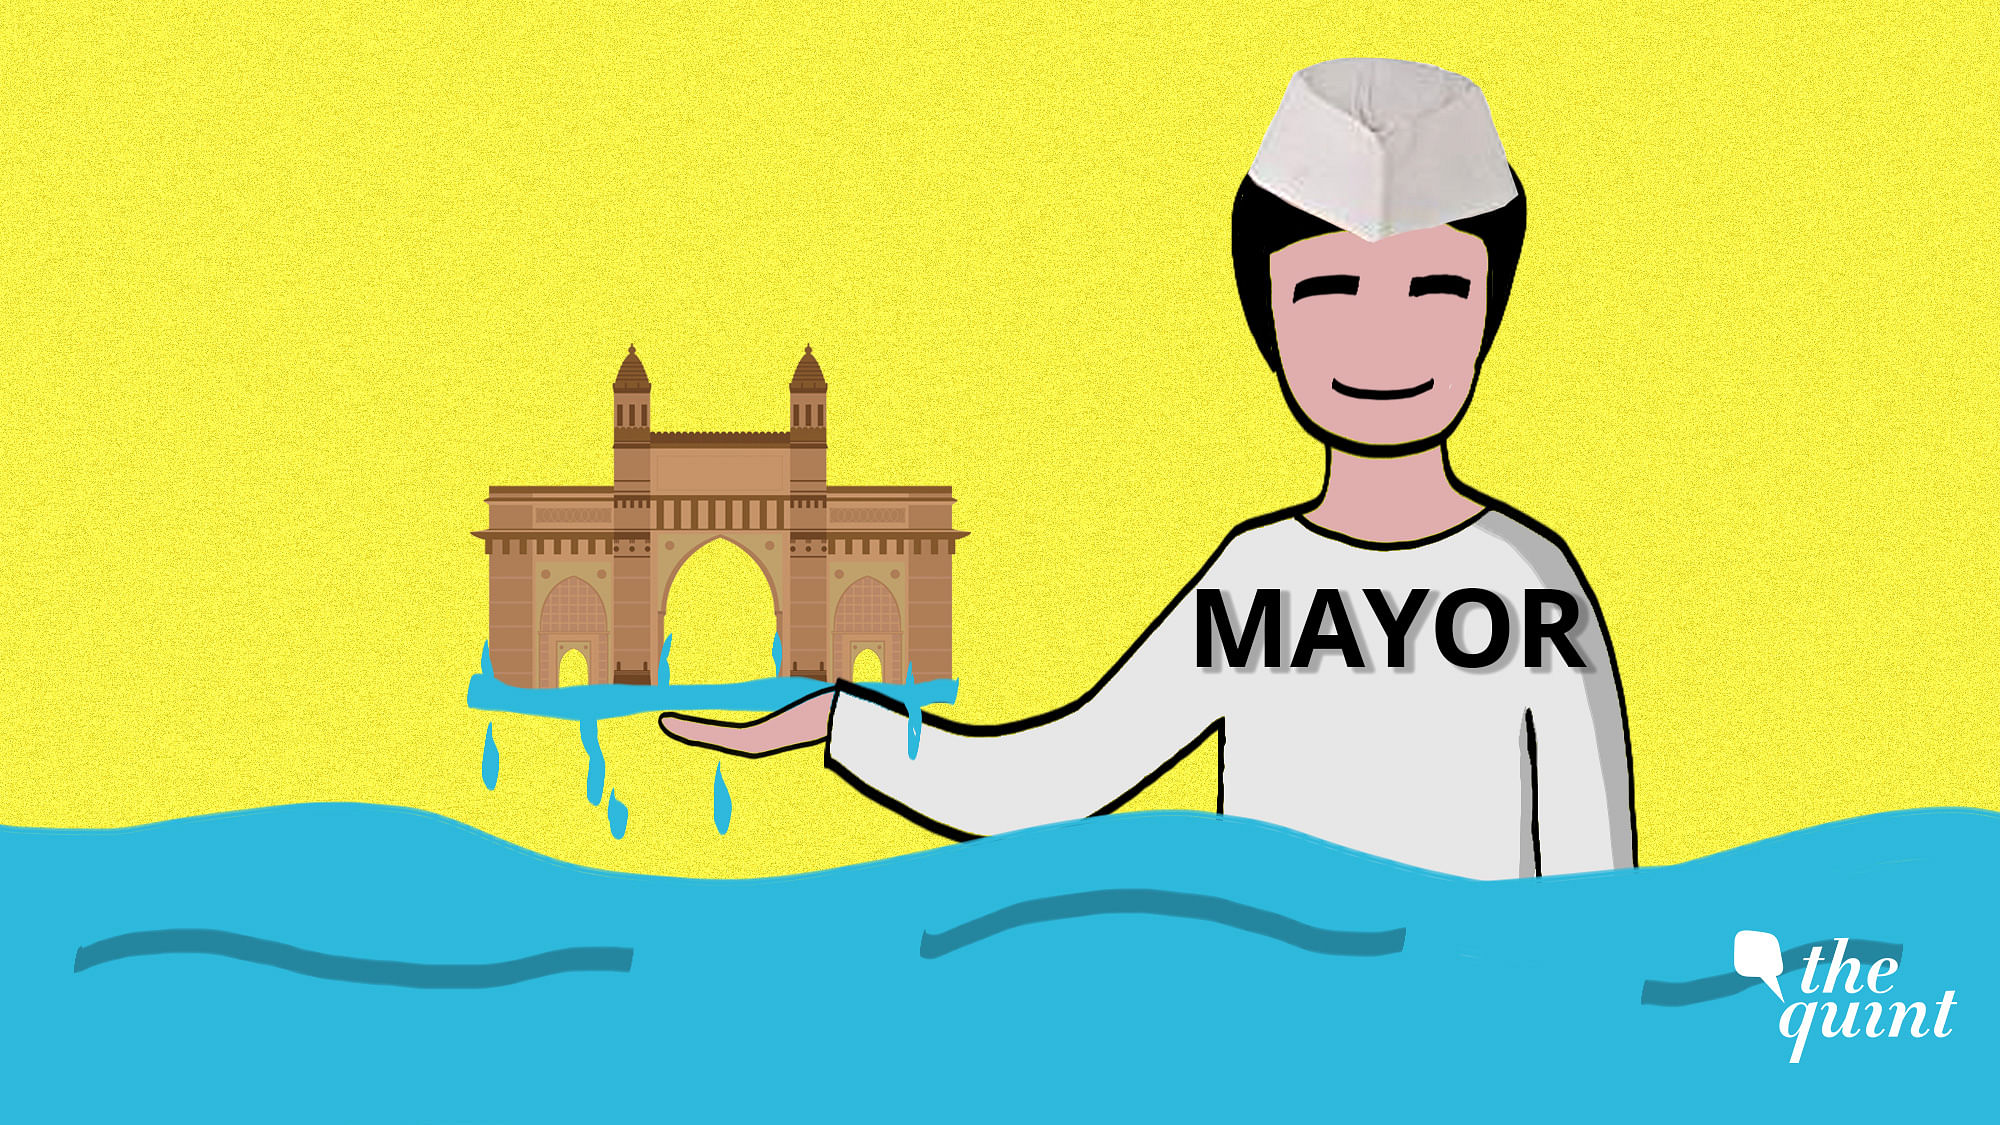 India needs city governments as a third layer of governance after the Centre and states.